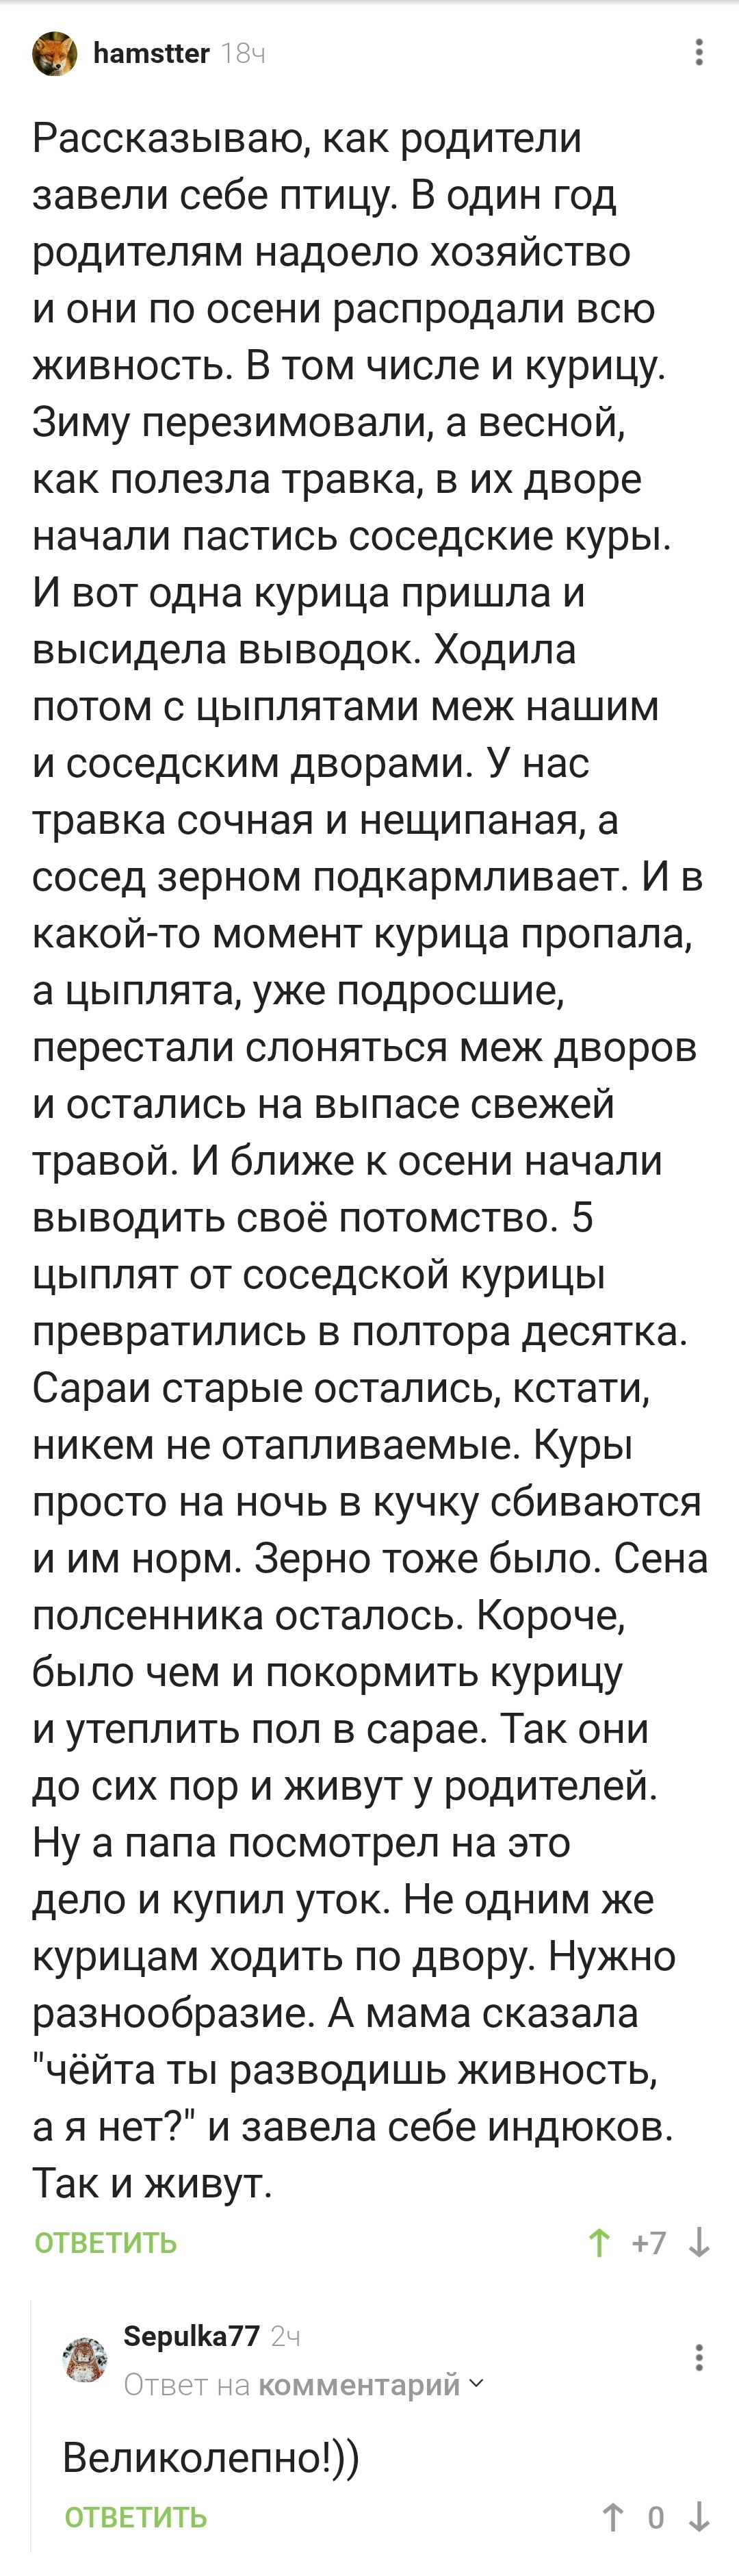 How to suddenly become a poultry farmer?) - Hen, Dacha, Comments on Peekaboo, Longpost, Screenshot